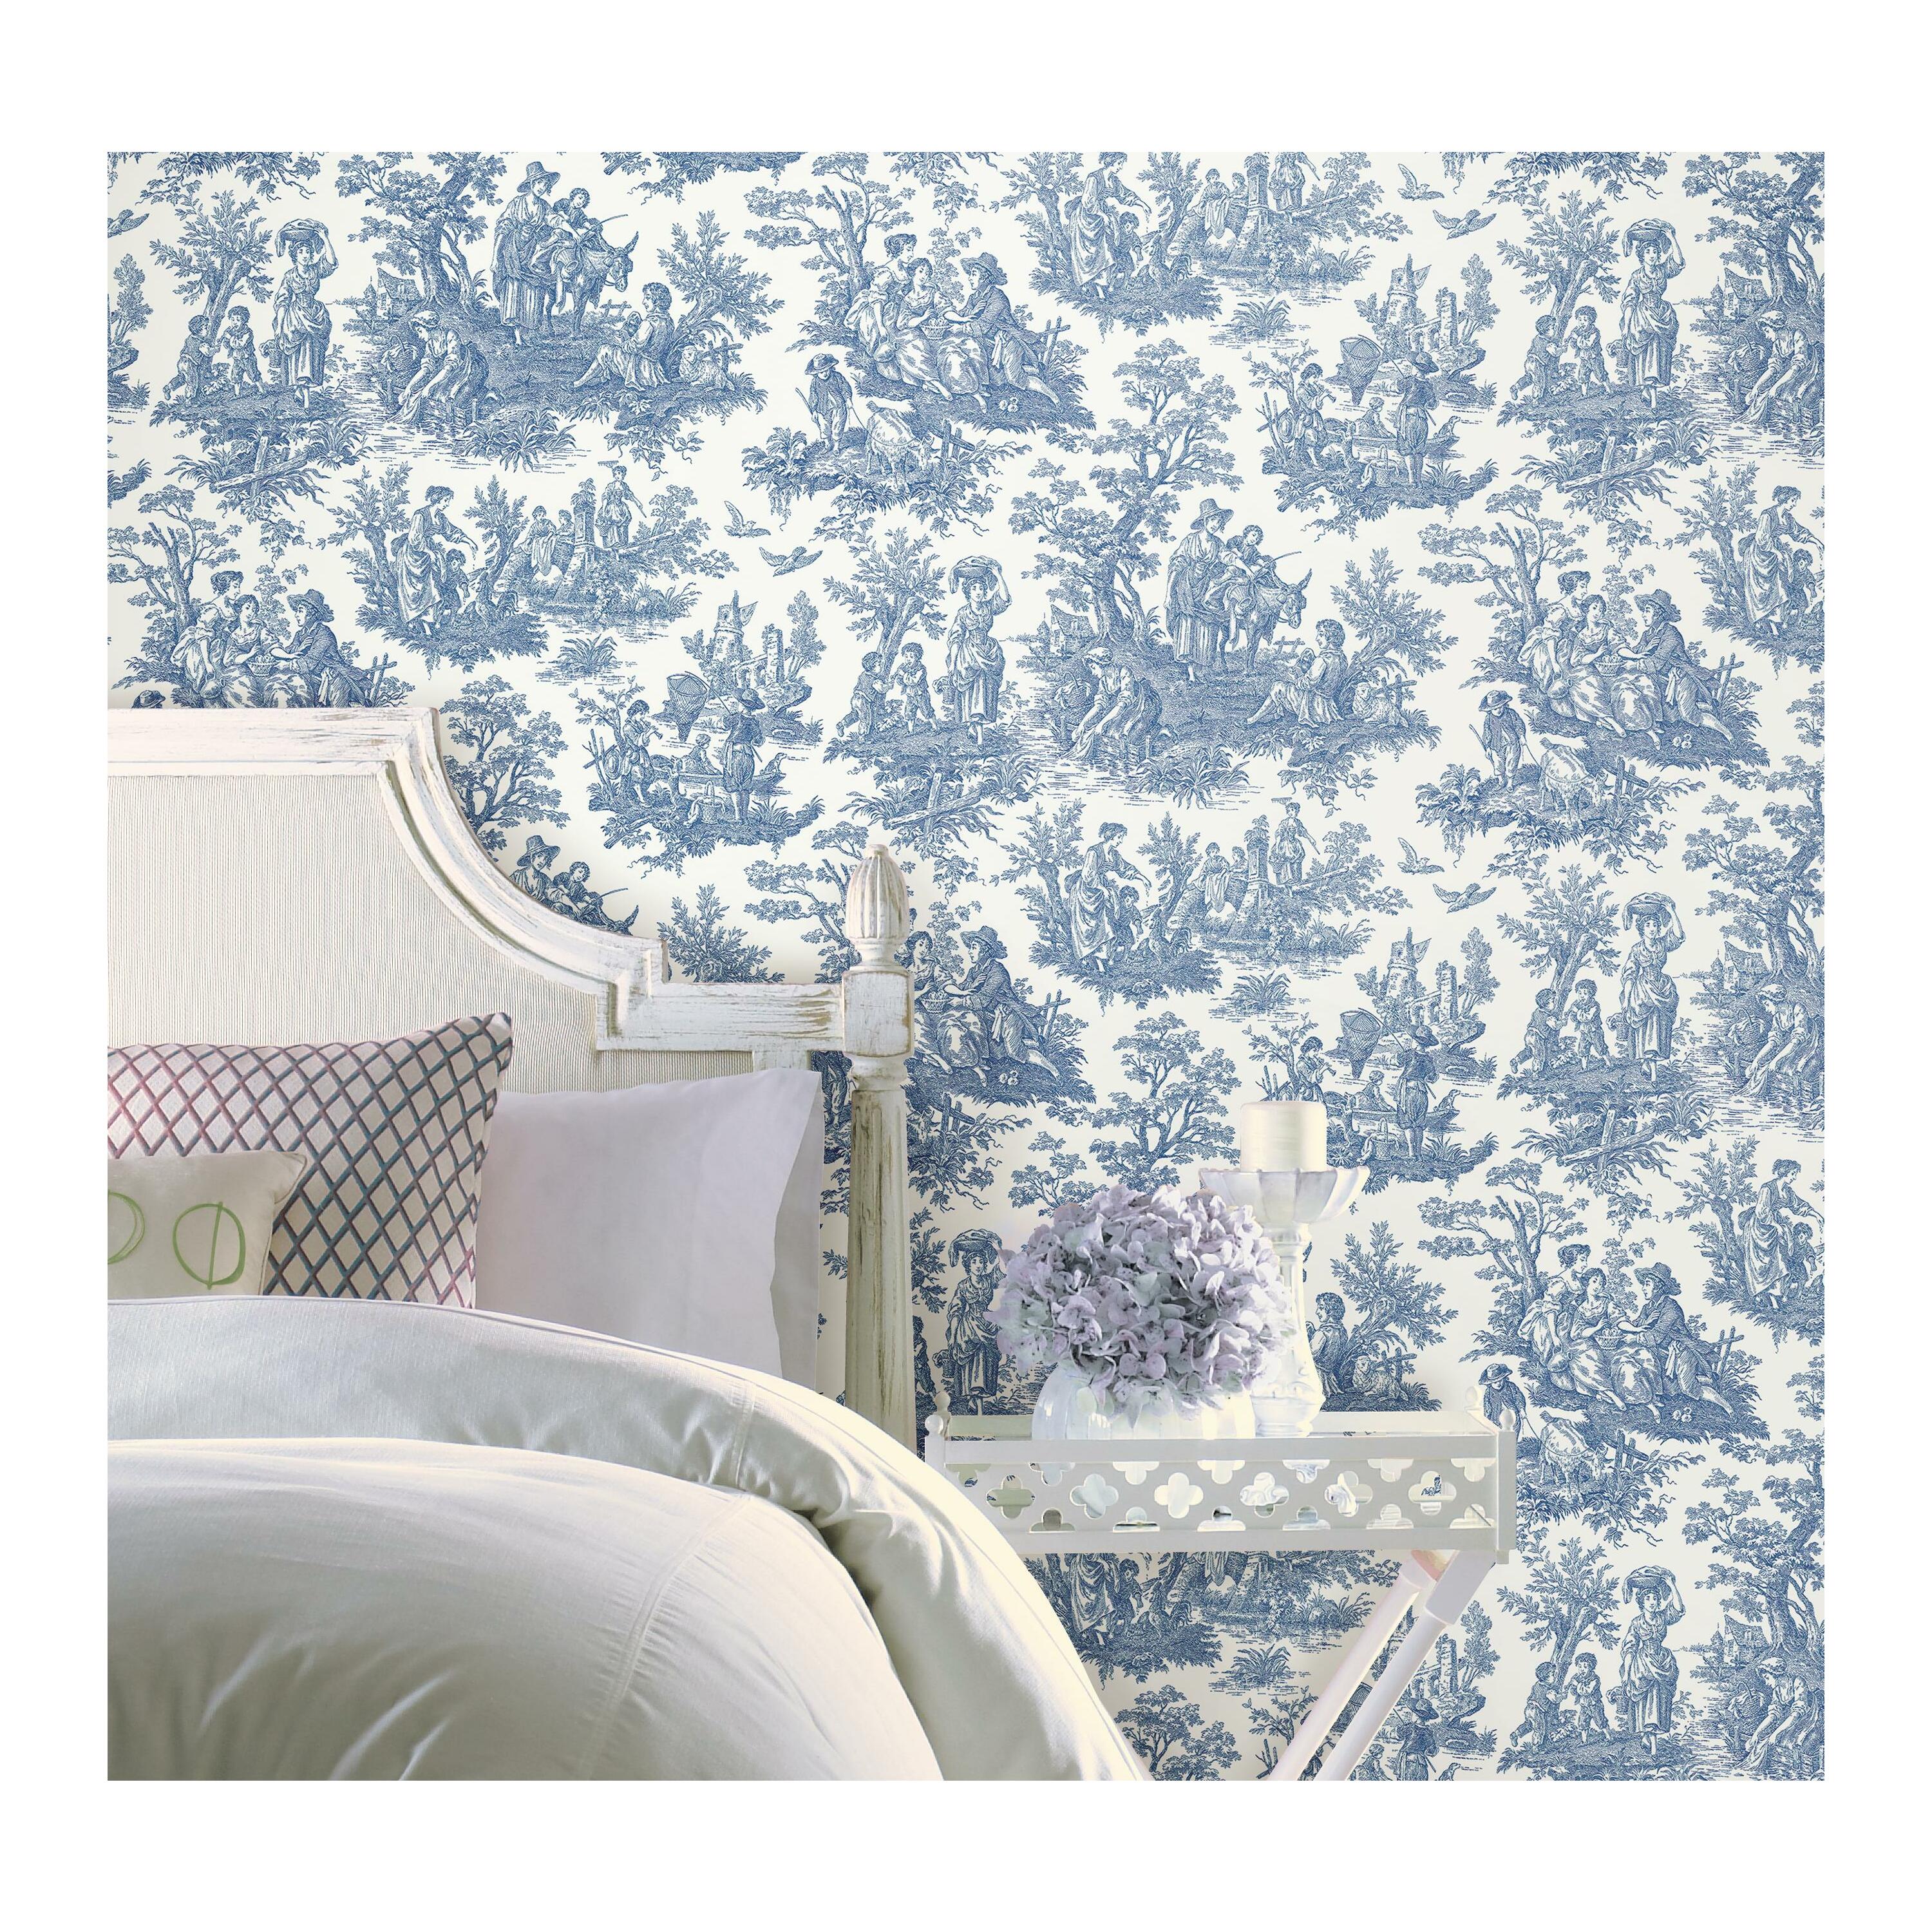 Top 5 Waverly Peel and Stick Wallpaper Patterns